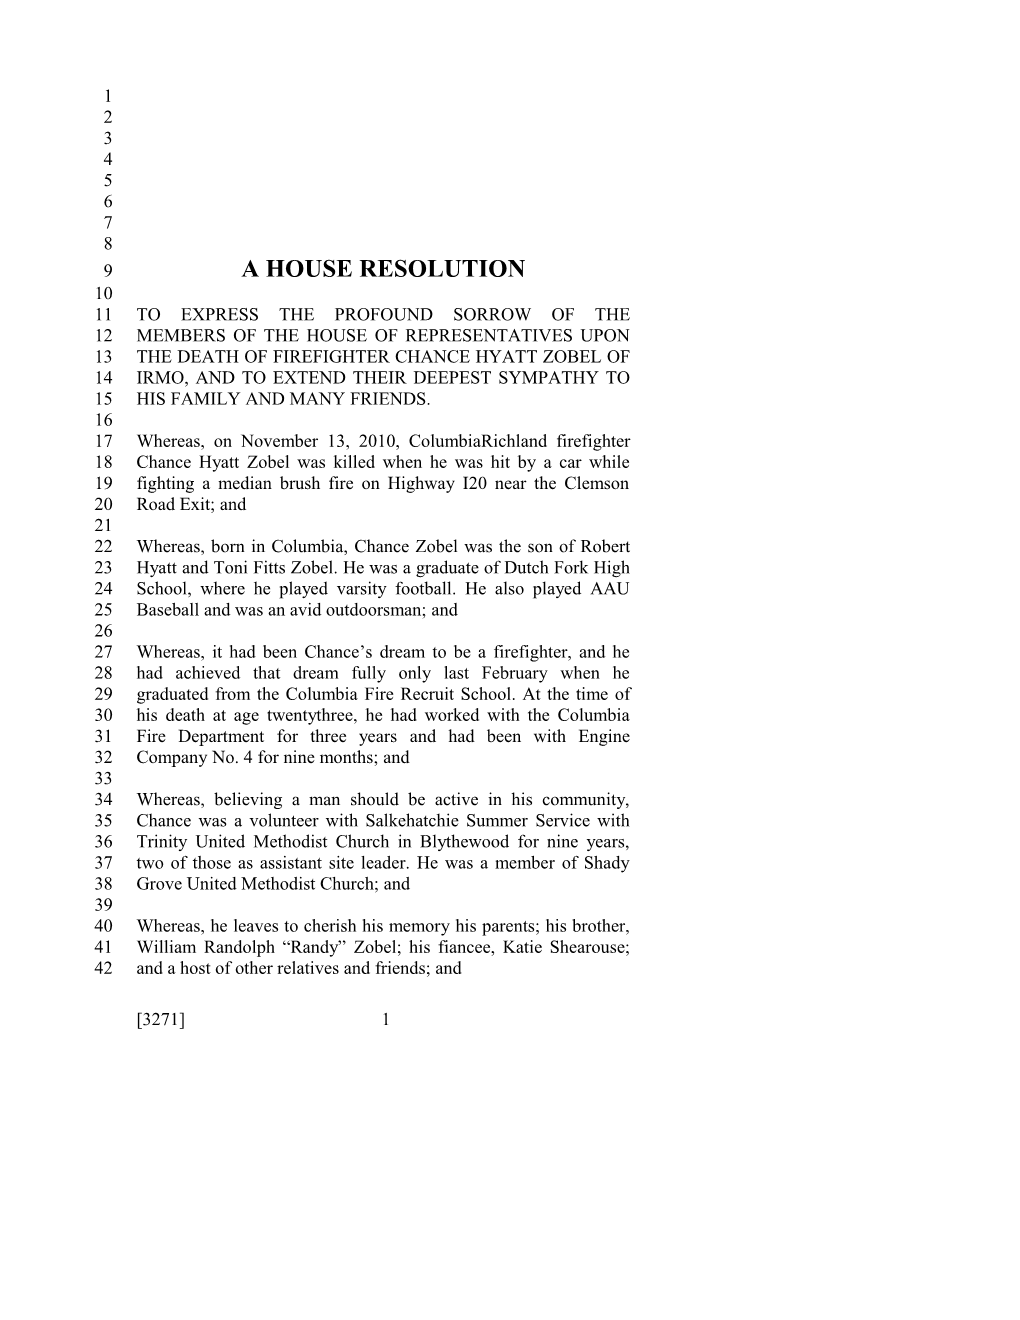 A House Resolution s16